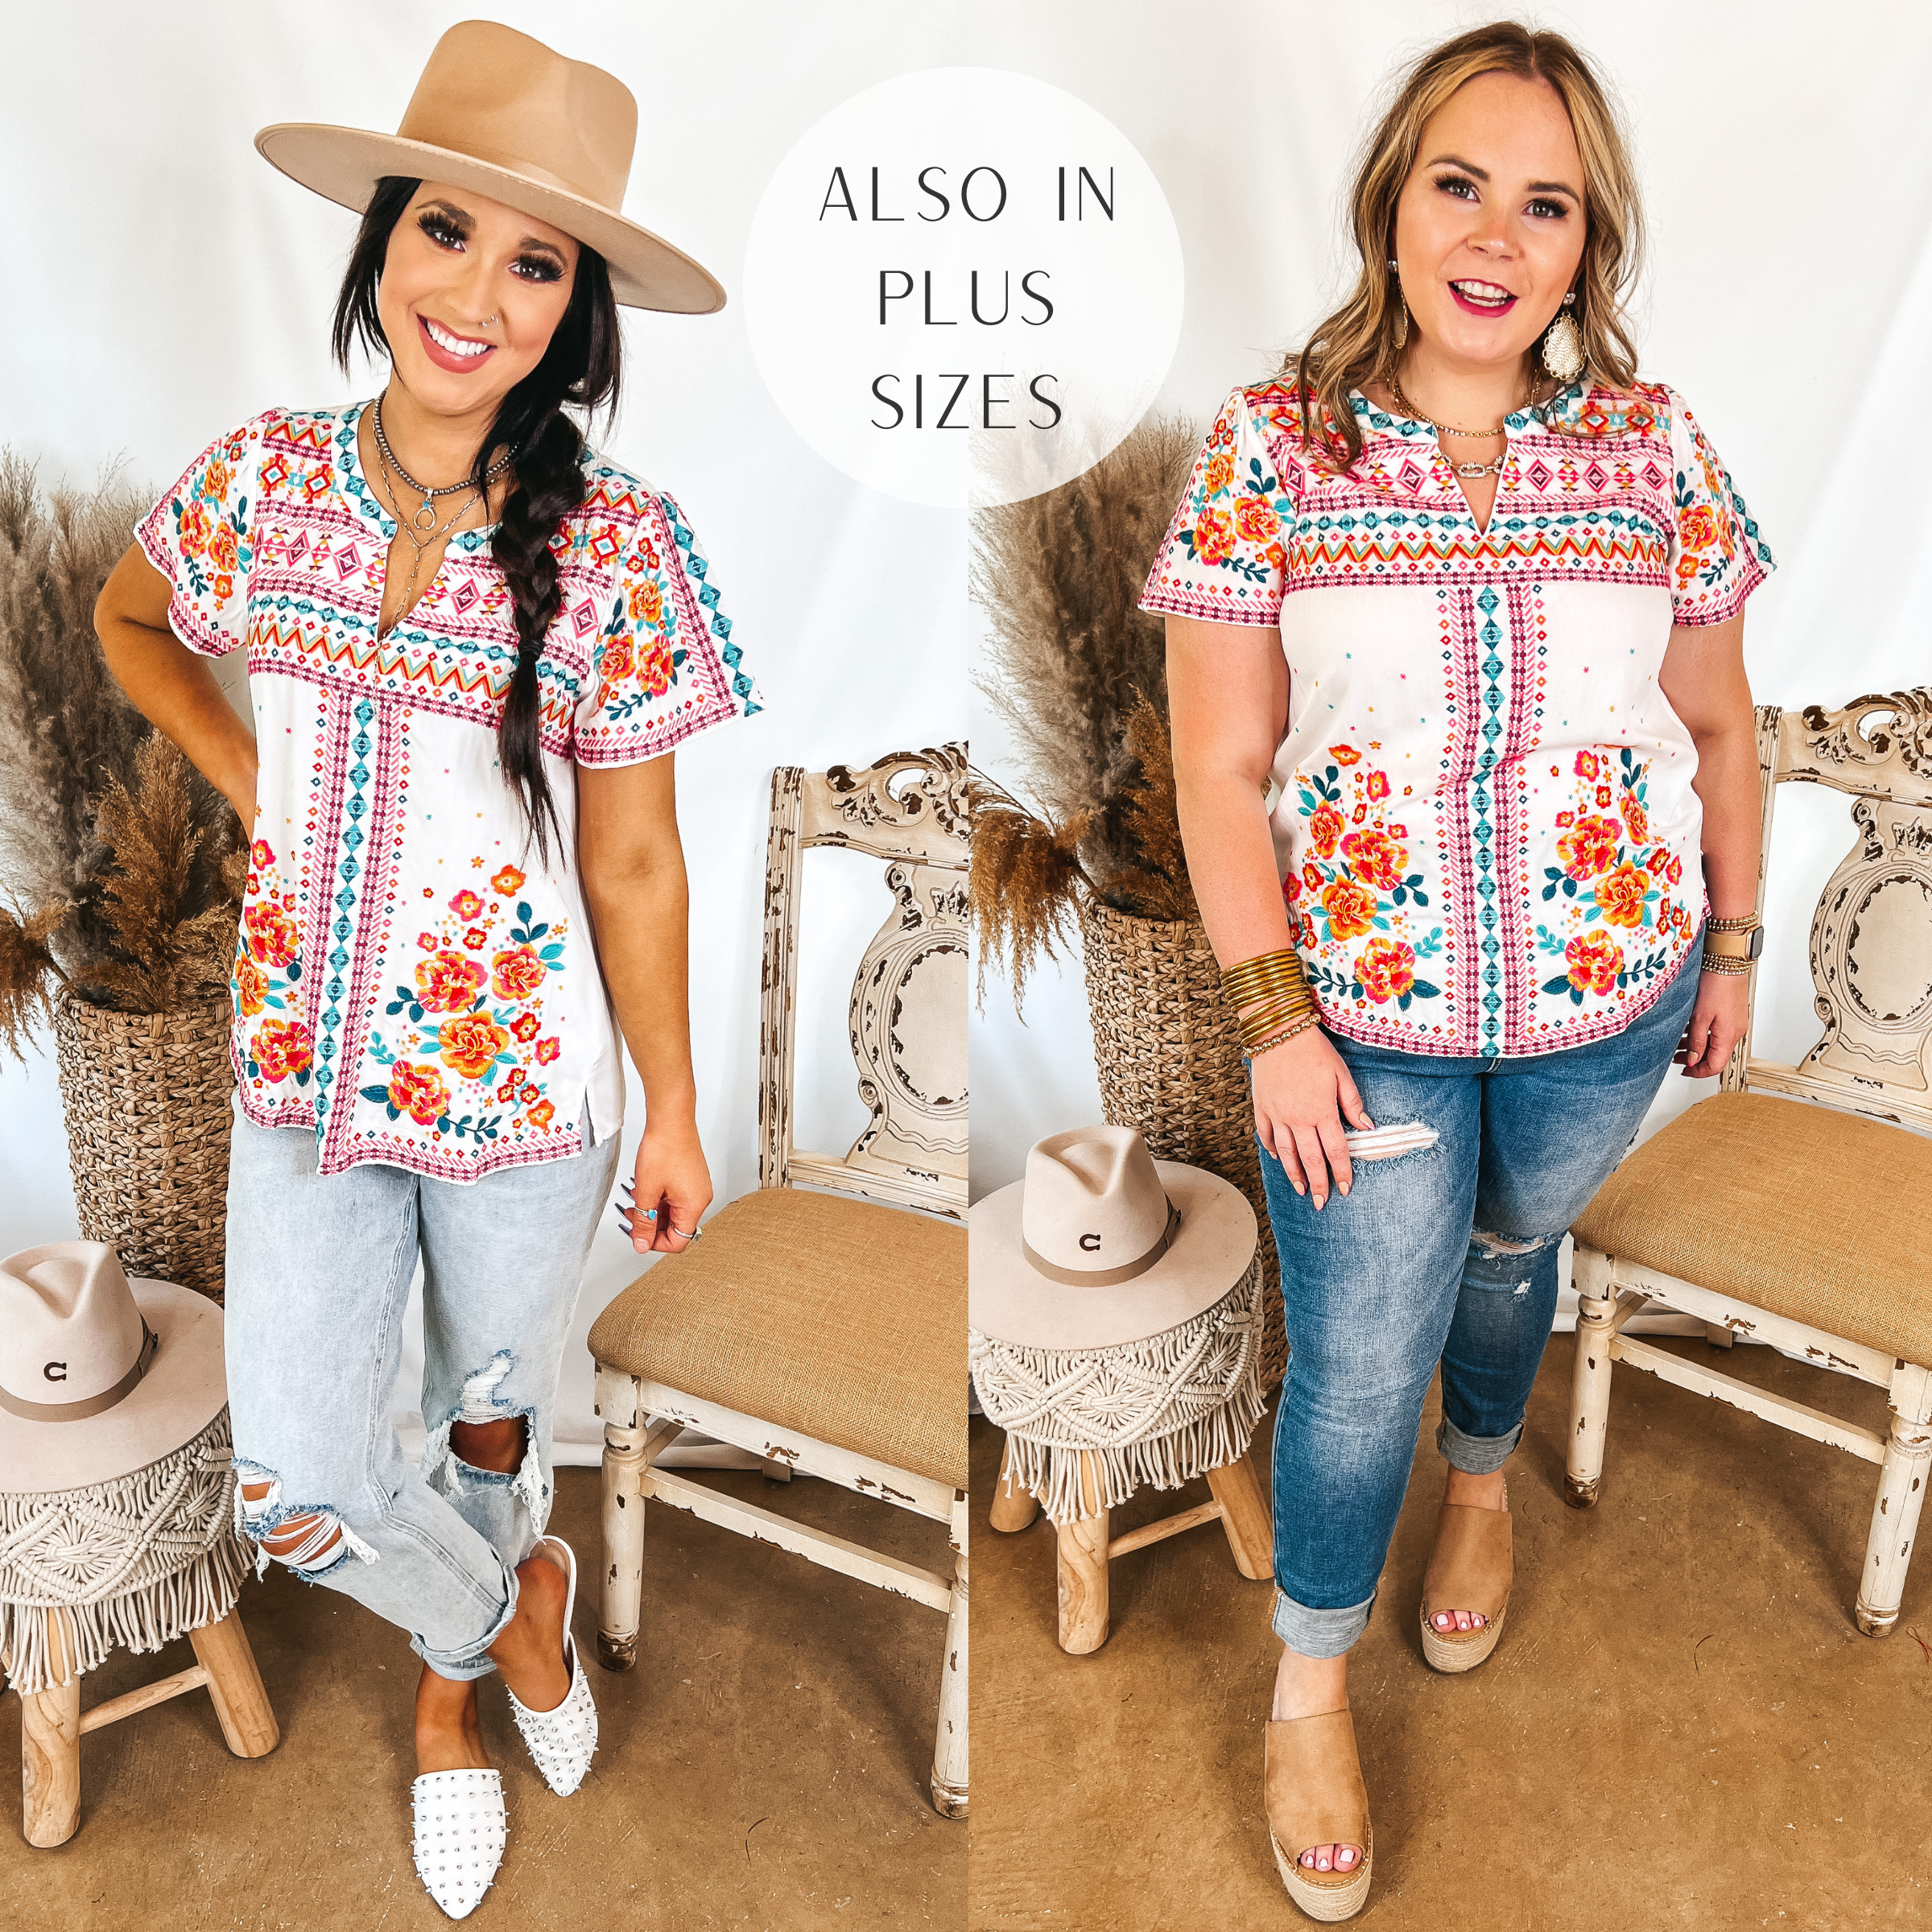 Models are wearing a white top that has colorful embroidery. Size small model has it paired with distressed light wash jeans, white mules, and a tan hat. Size large model has it paired with distressed skinny jeans, tan wedges, and gold jewelry.